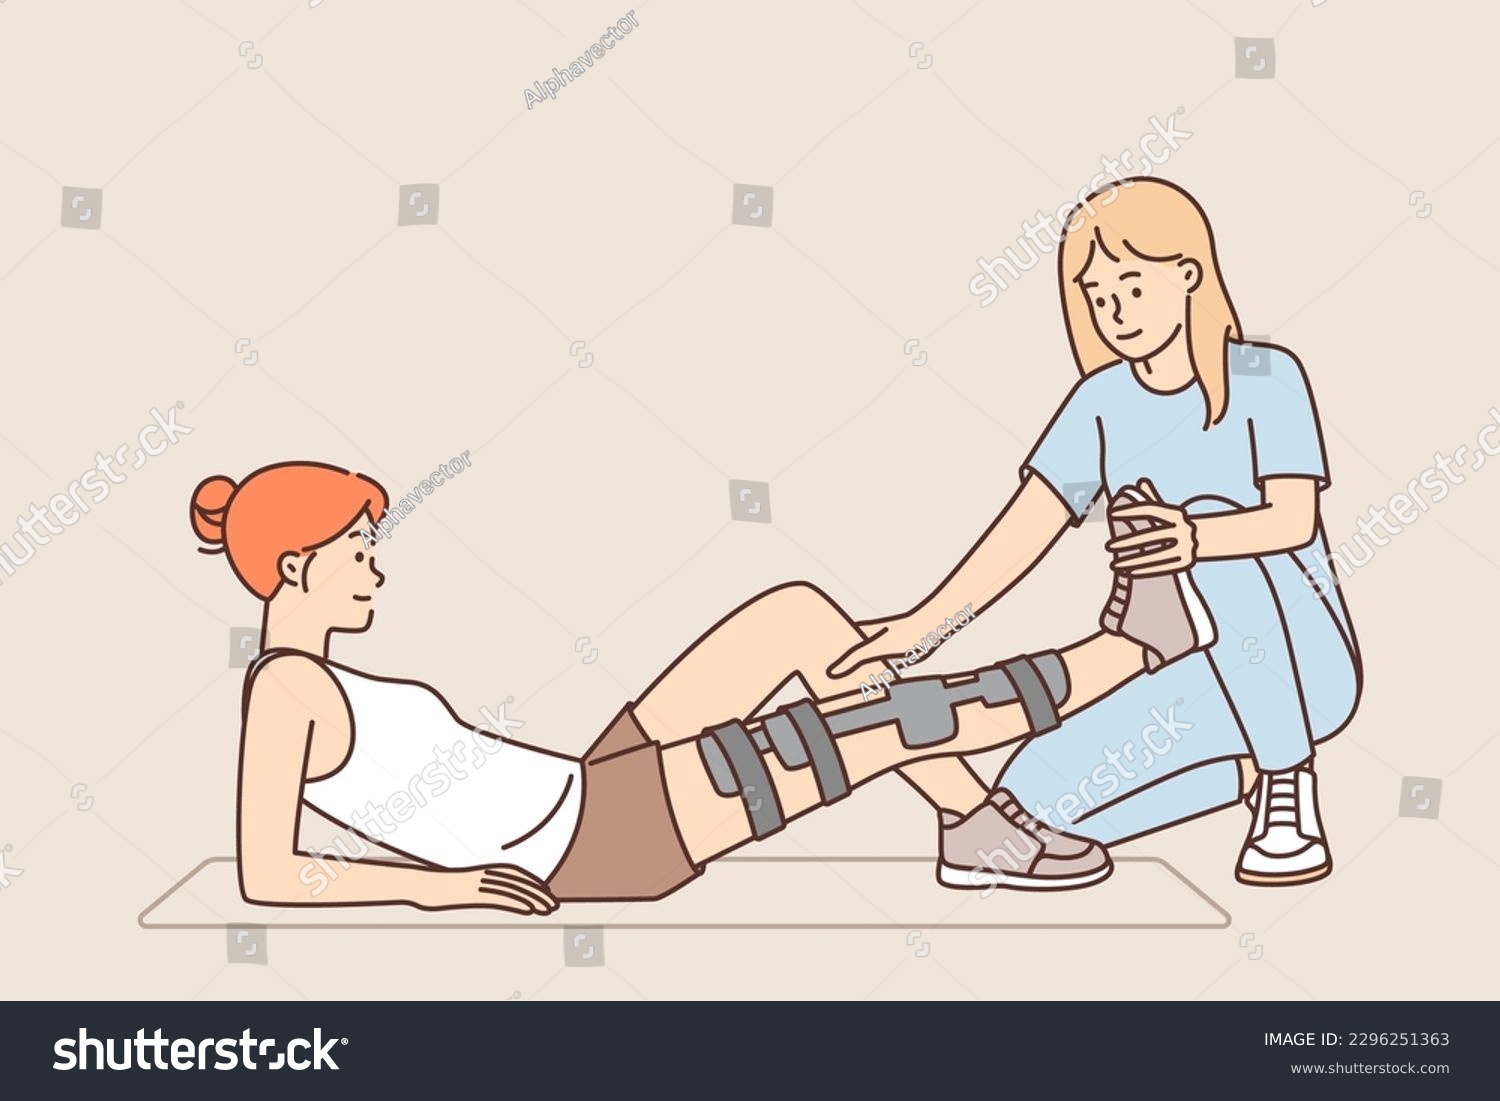 SVG of Woman with leg injury uses services of doctor who helps in rehabilitation to treat fracture. Girl lies on mat with bandage on leg for concept of rehabilitation after car accident or fall svg